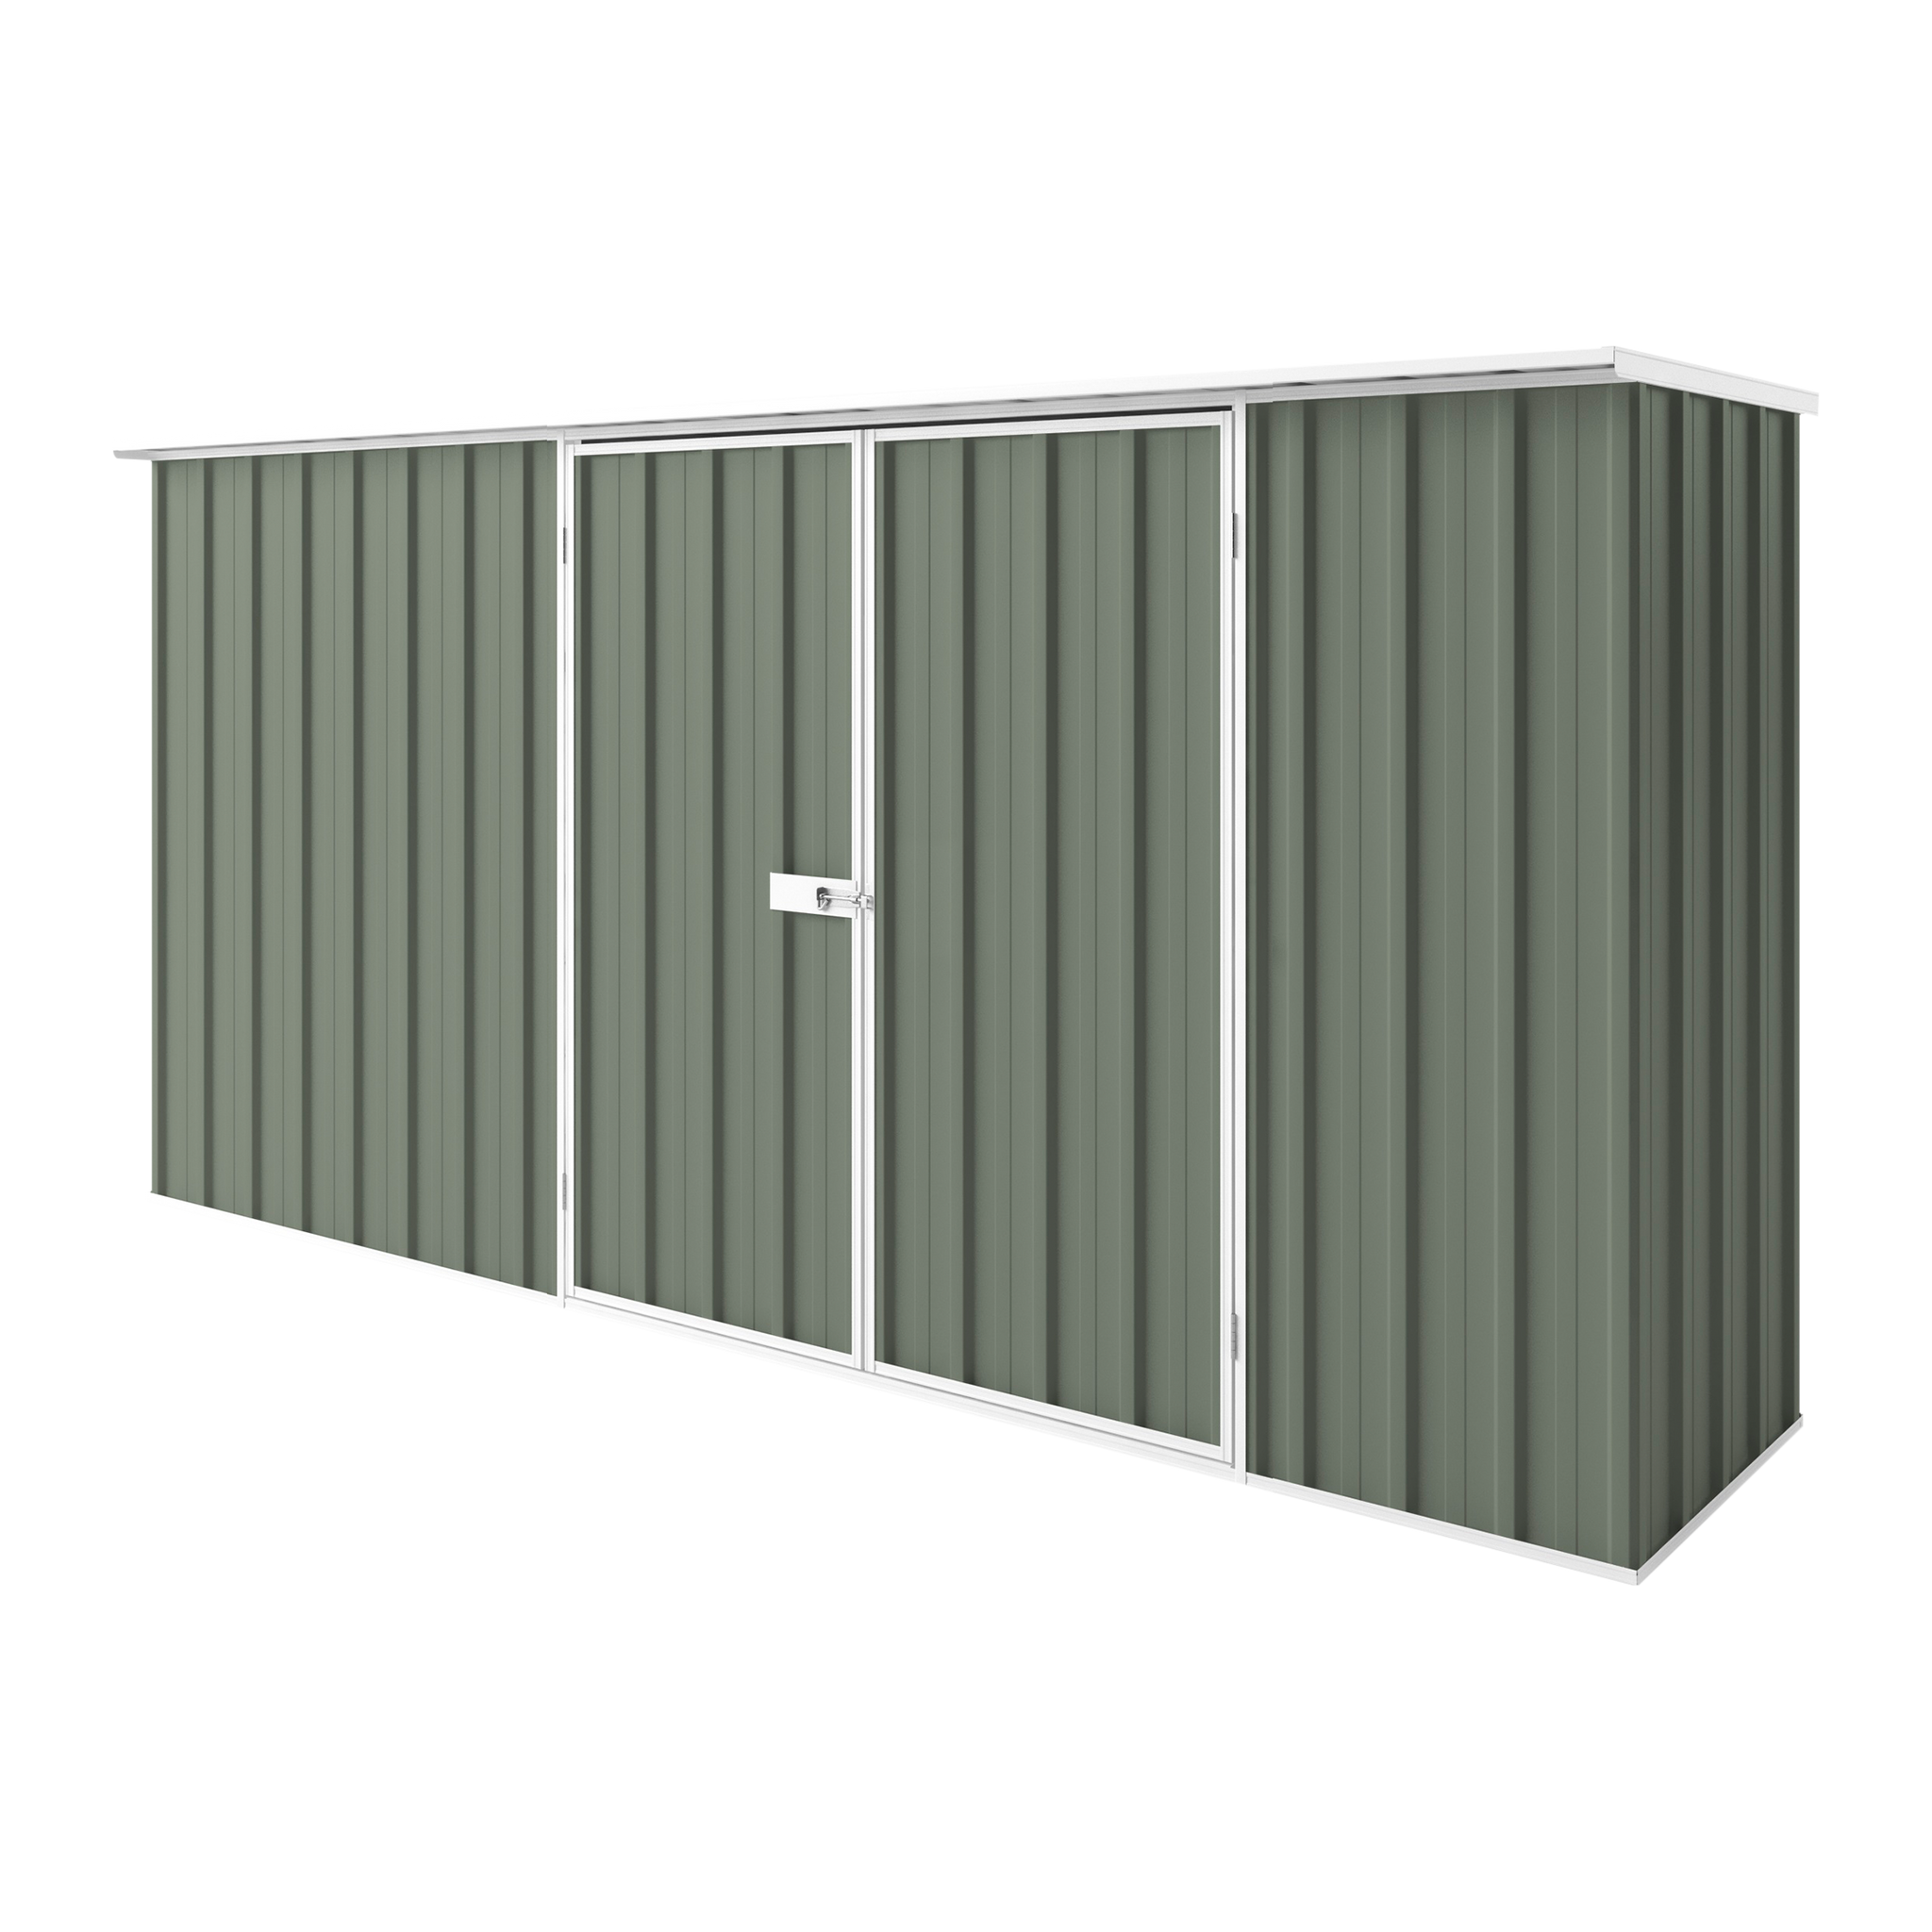 3.75m x 0.78m Flat Roof Garden Shed - EasyShed